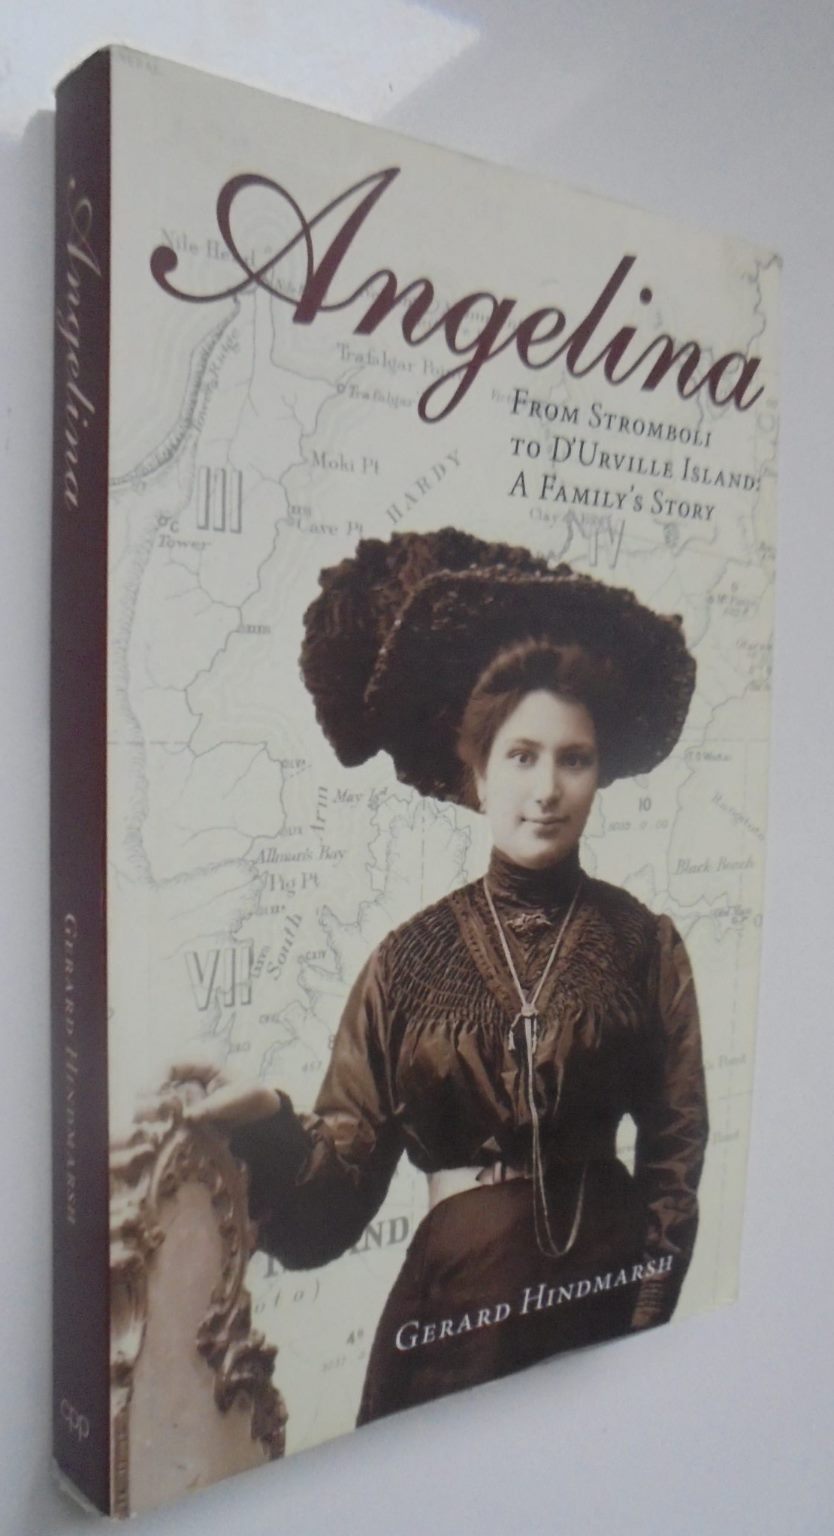 Angelina From Stromboli to D'Urville Island - A Family's Story SIGNED by Gerard Hindmarsh